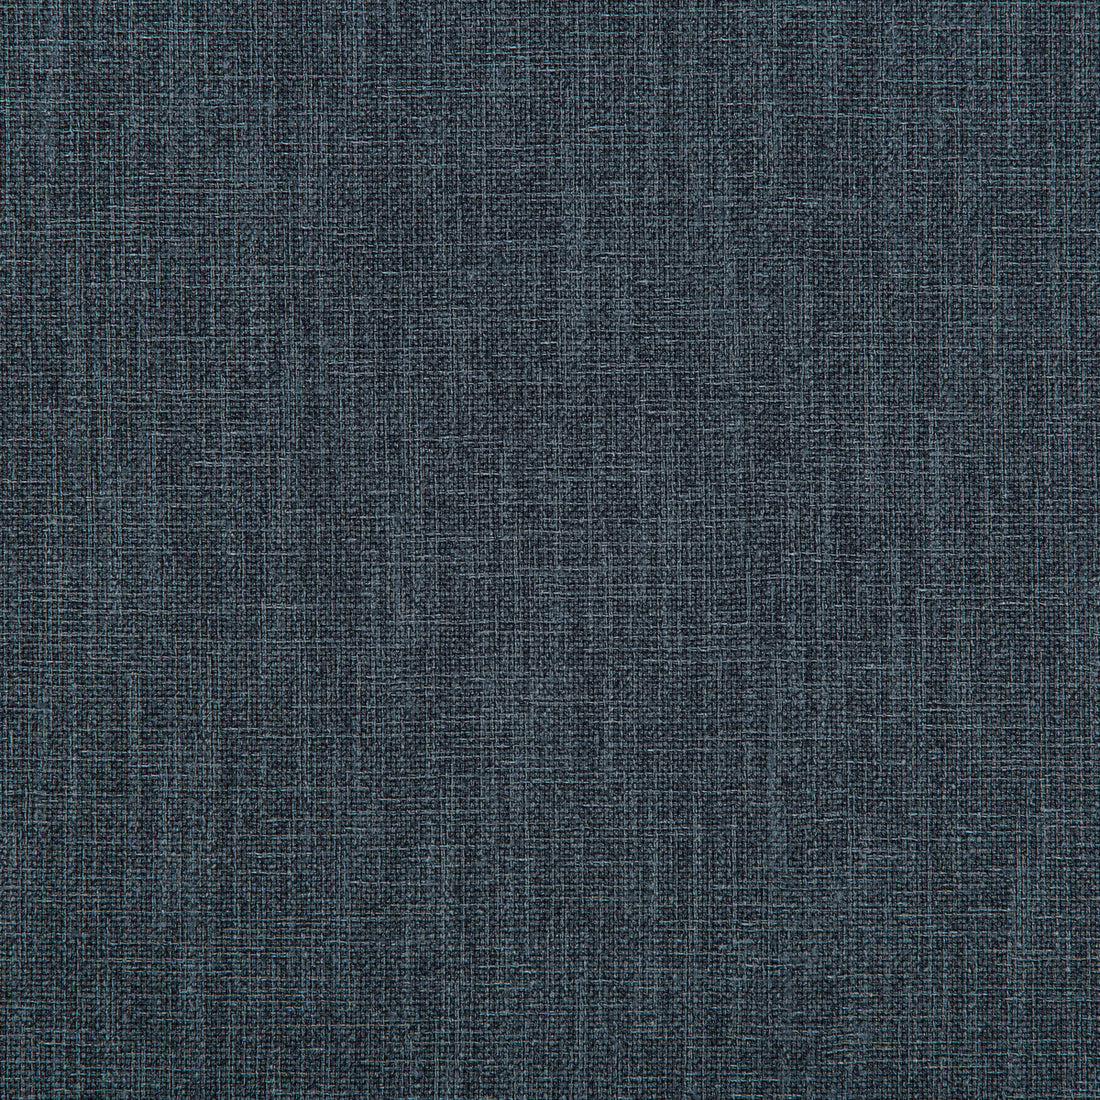 Kravet Contract fabric in 4644-50 color - pattern 4644.50.0 - by Kravet Contract